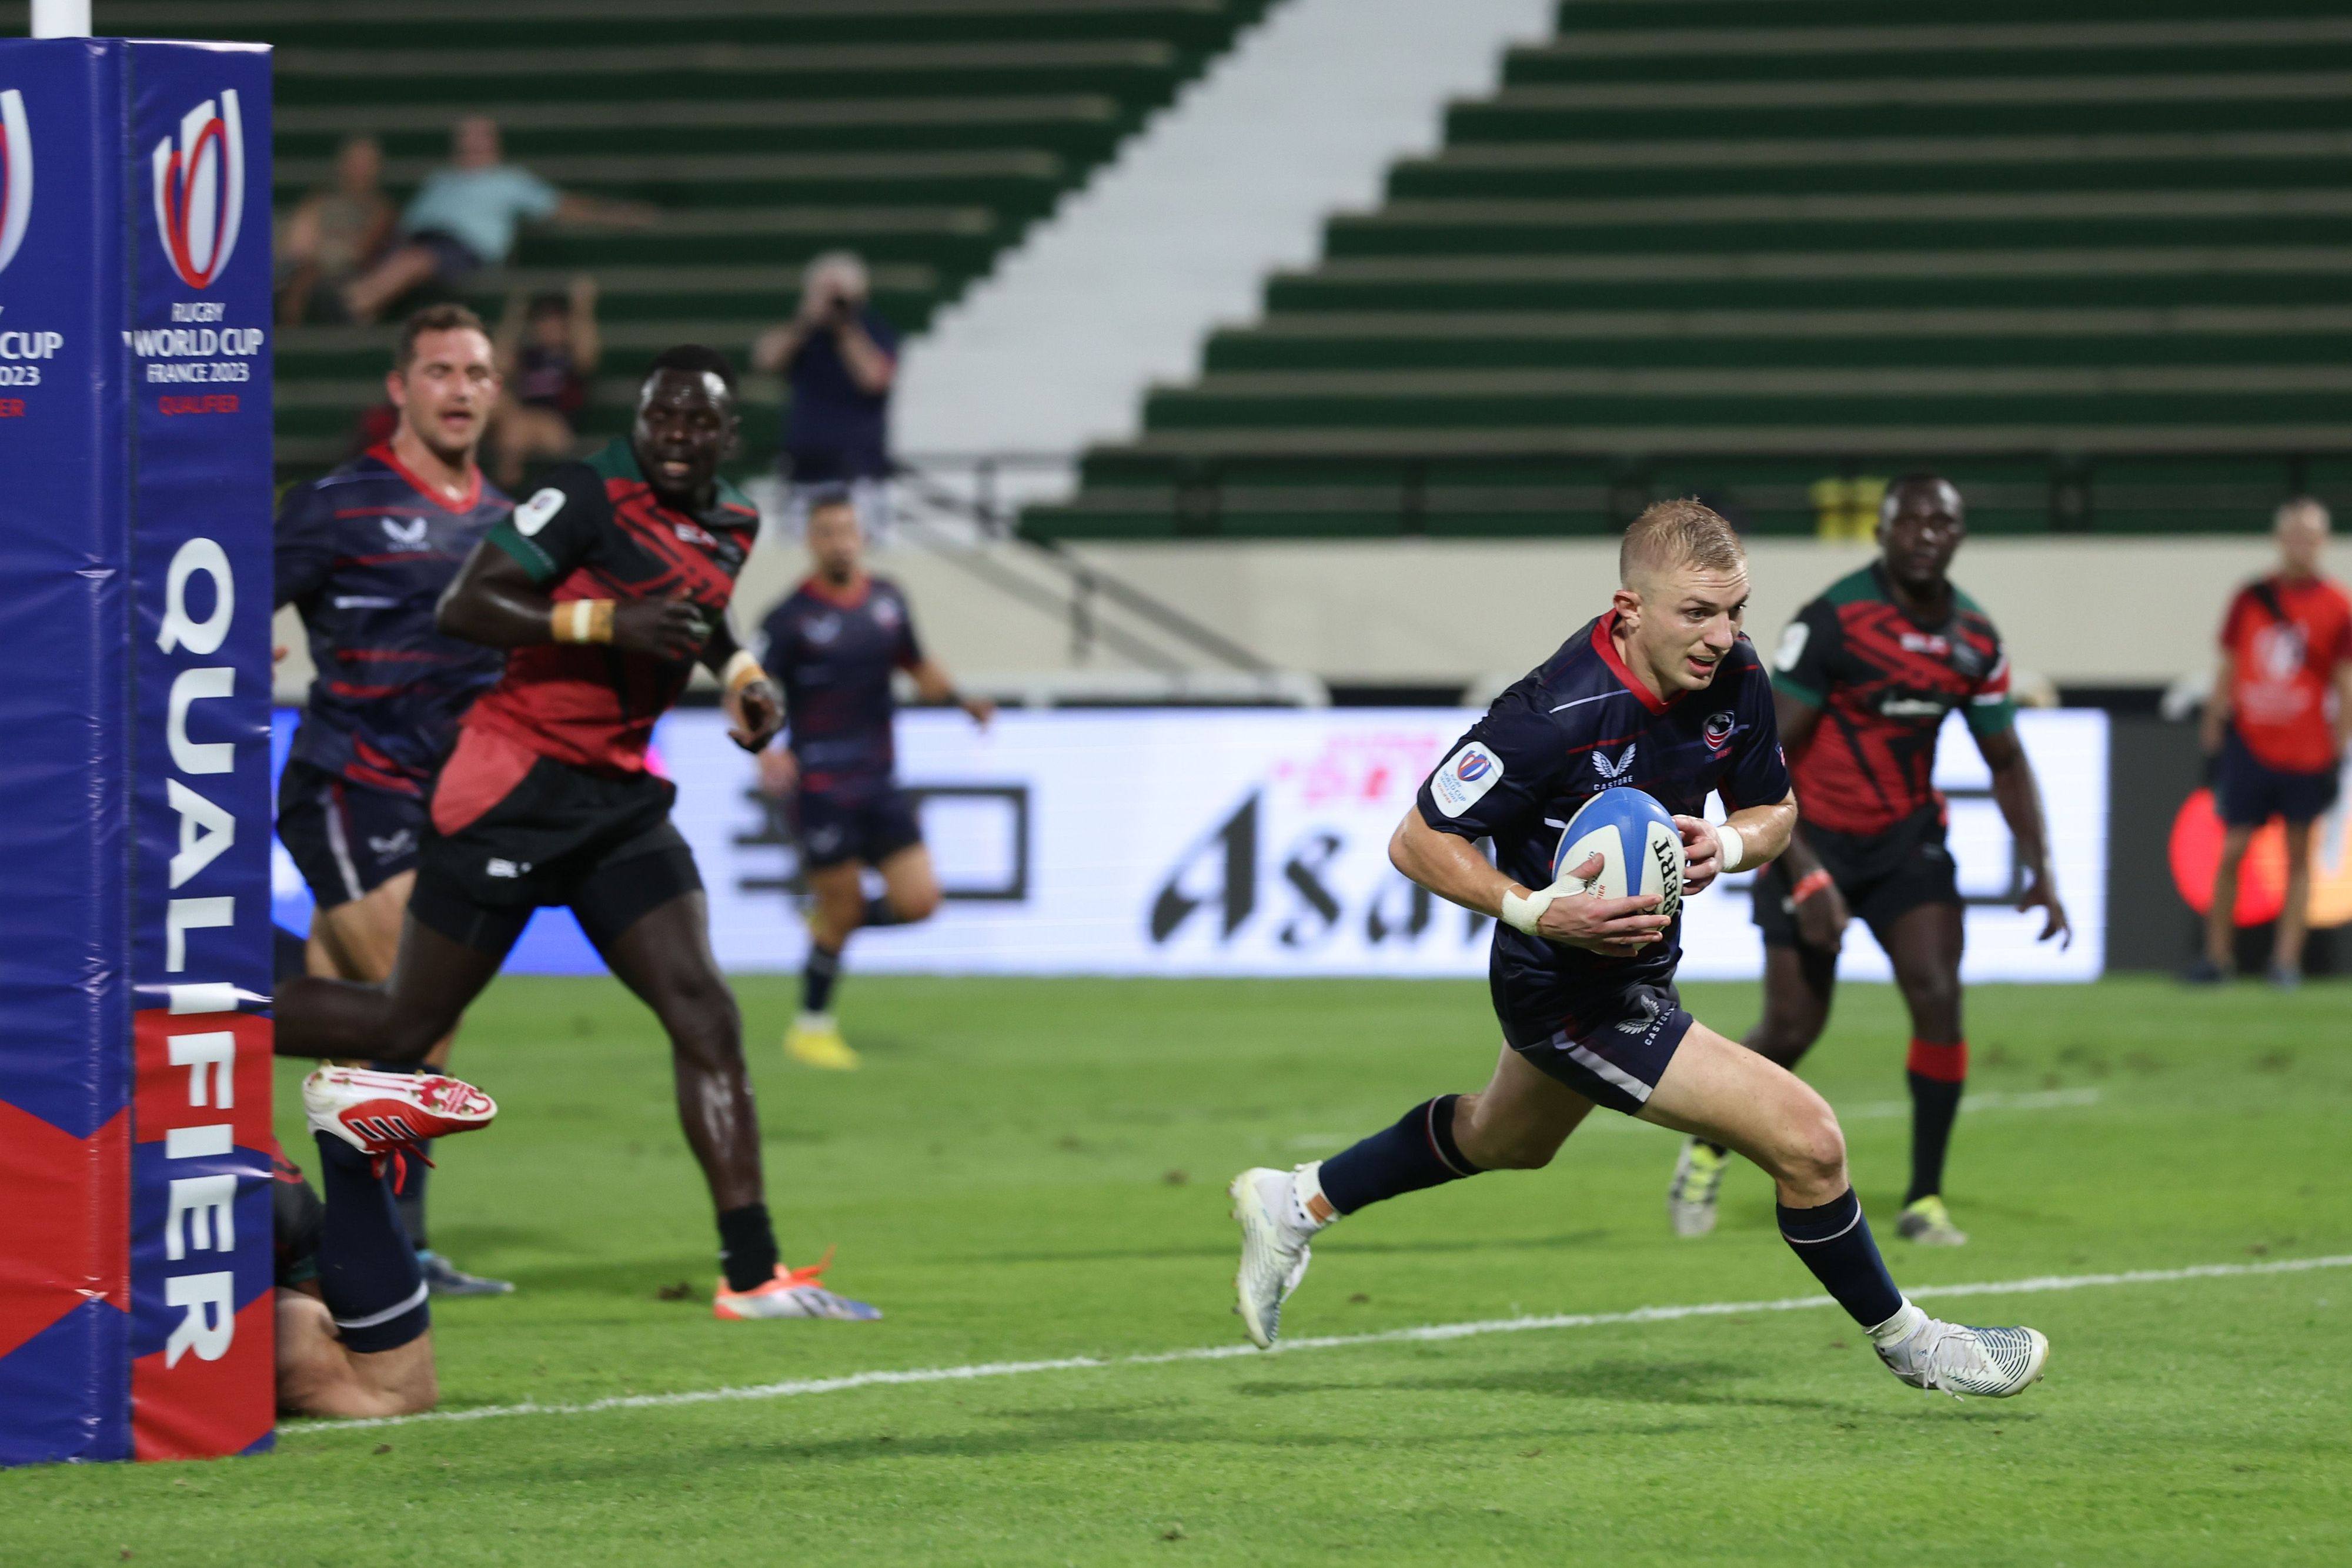 USA’s Mitch Wilson scores against Kenya in the Rugby World Cup final qualifying tournament at The Sevens Stadium in Dubai. Photo: World Rugby